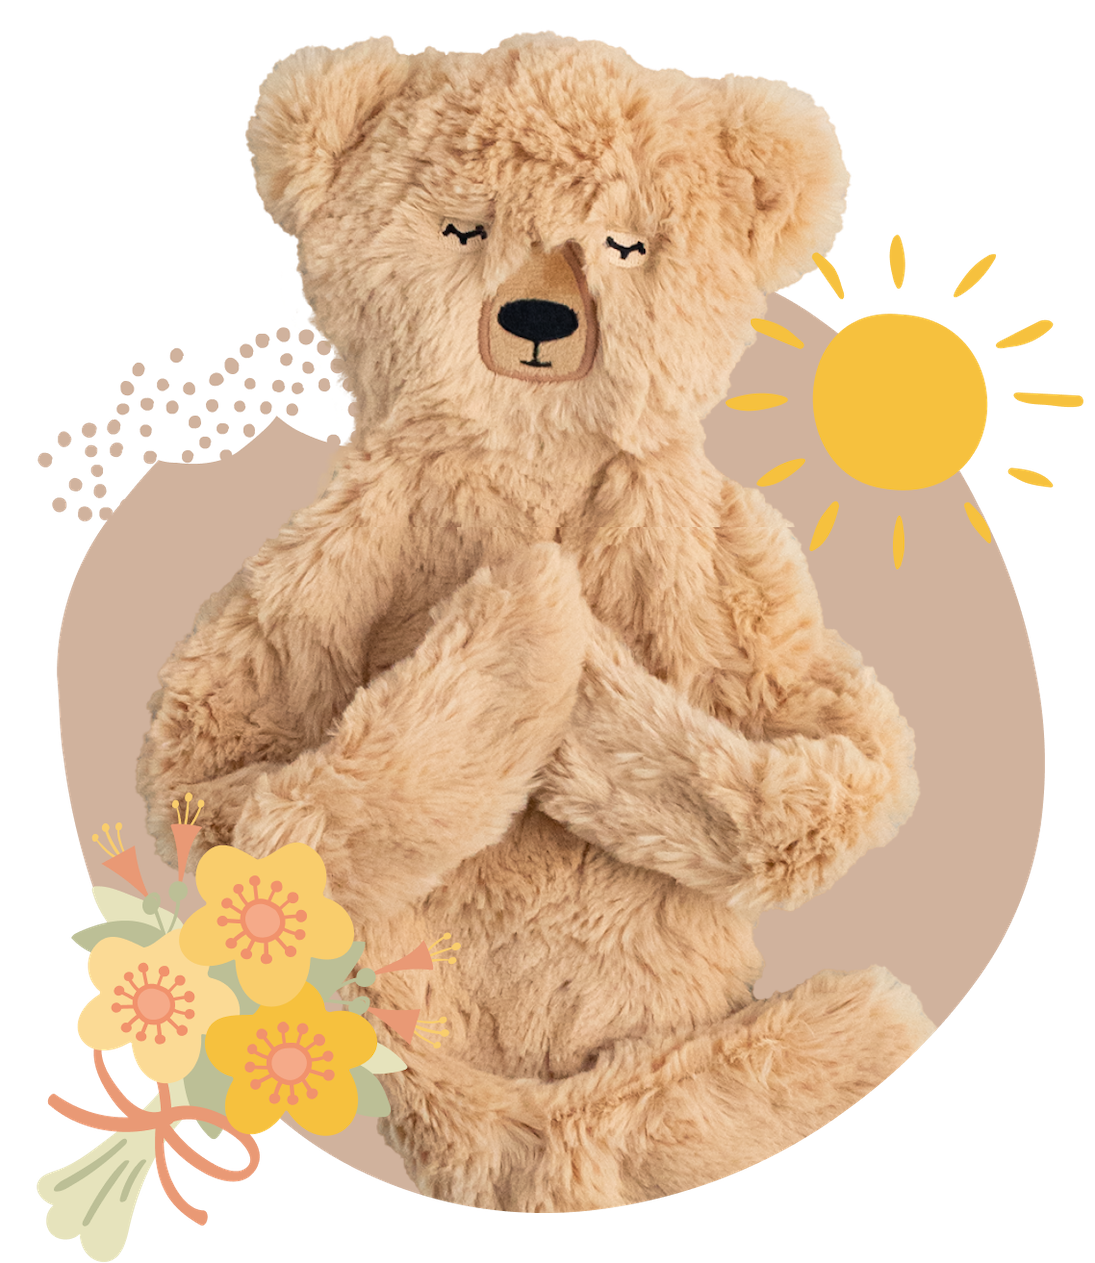 Honey bear snuggler with flower and sun icons